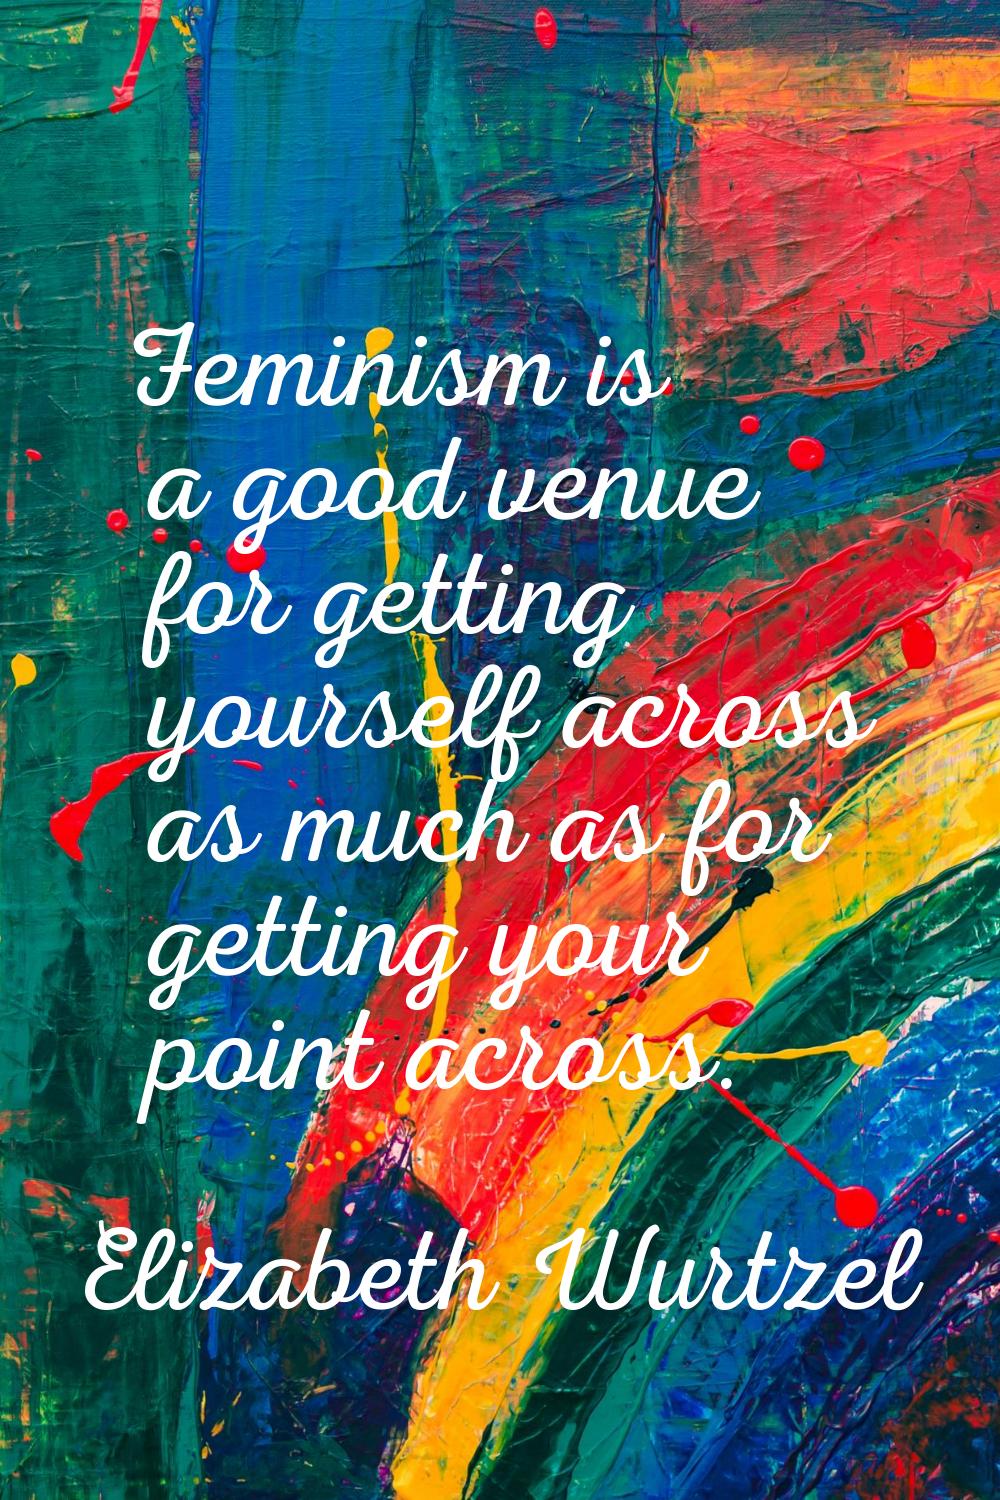 Feminism is a good venue for getting yourself across as much as for getting your point across.